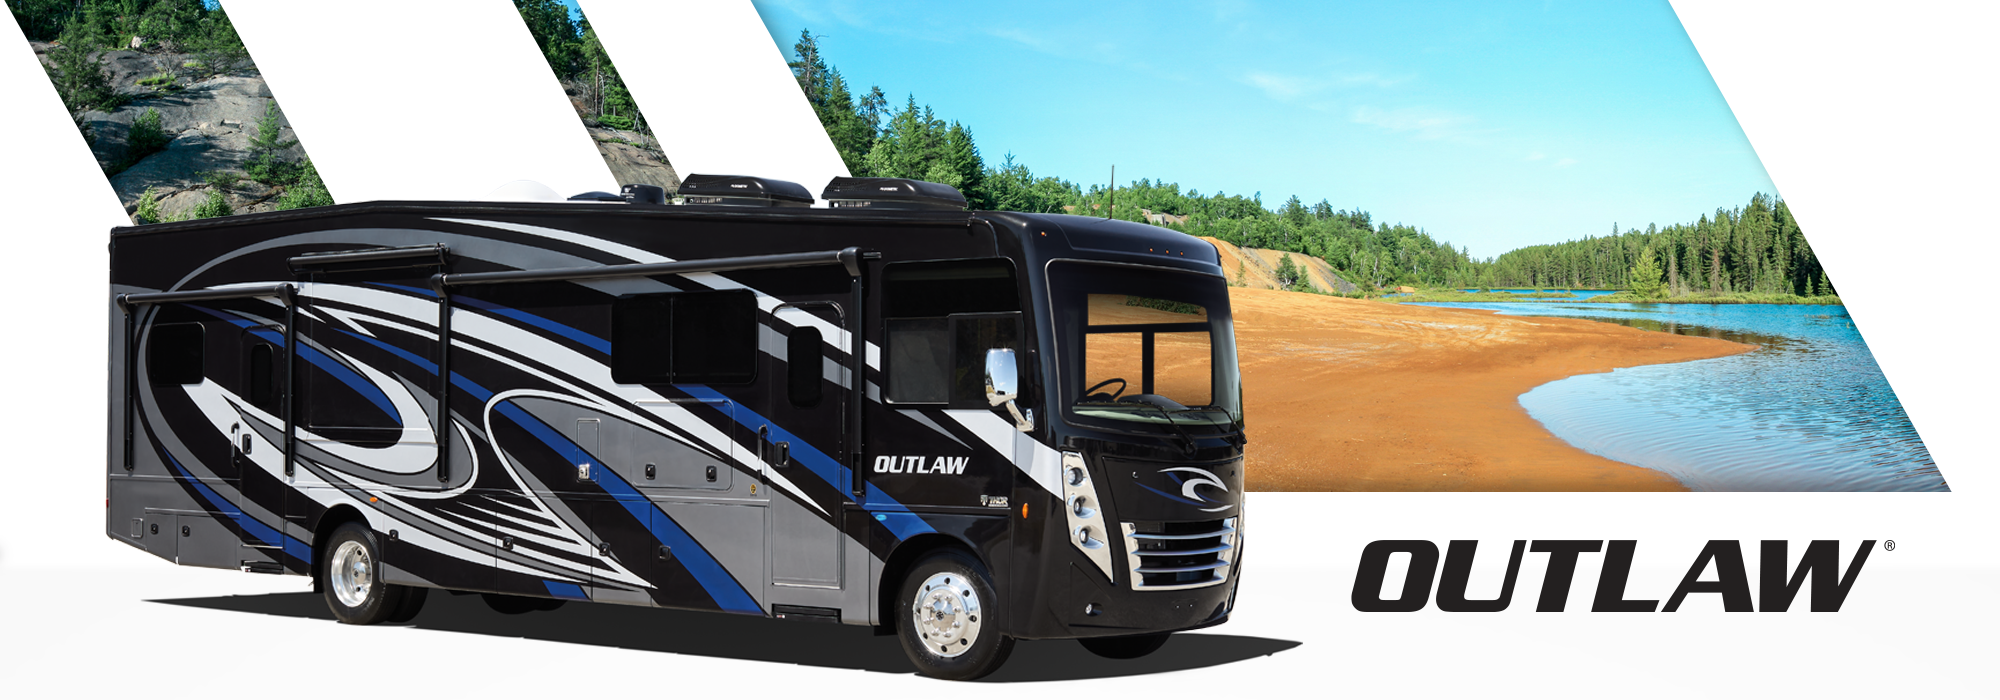 Thor Outlaw Class A Toy Hauler Motorhomes